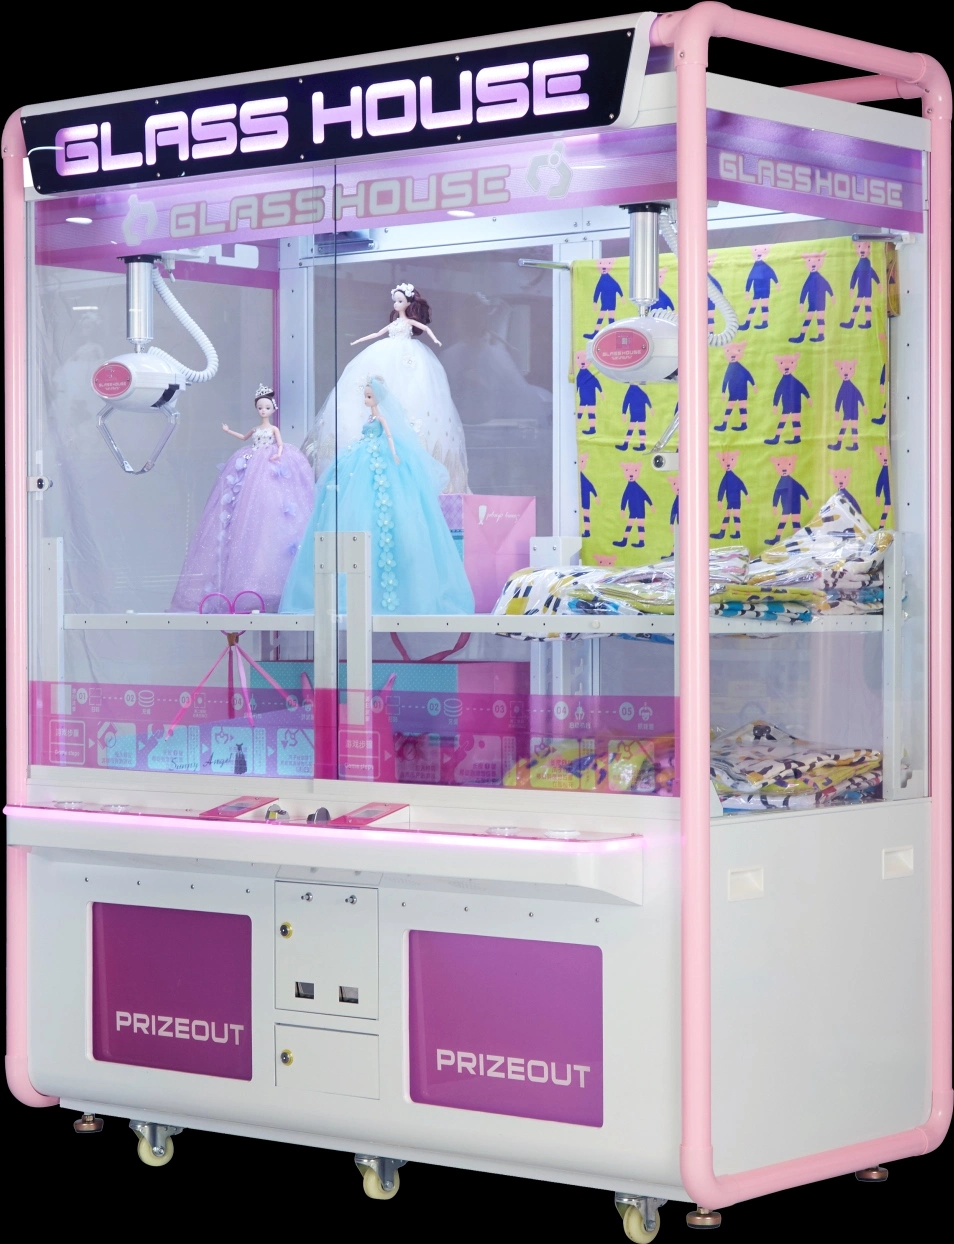 Glass House/Prize/Gift/Toy Vending//Game /Claw Machine/Game Player/Arcade Game Machines/Video Game/Amusement Machine/Arcade Machine/Game Machine